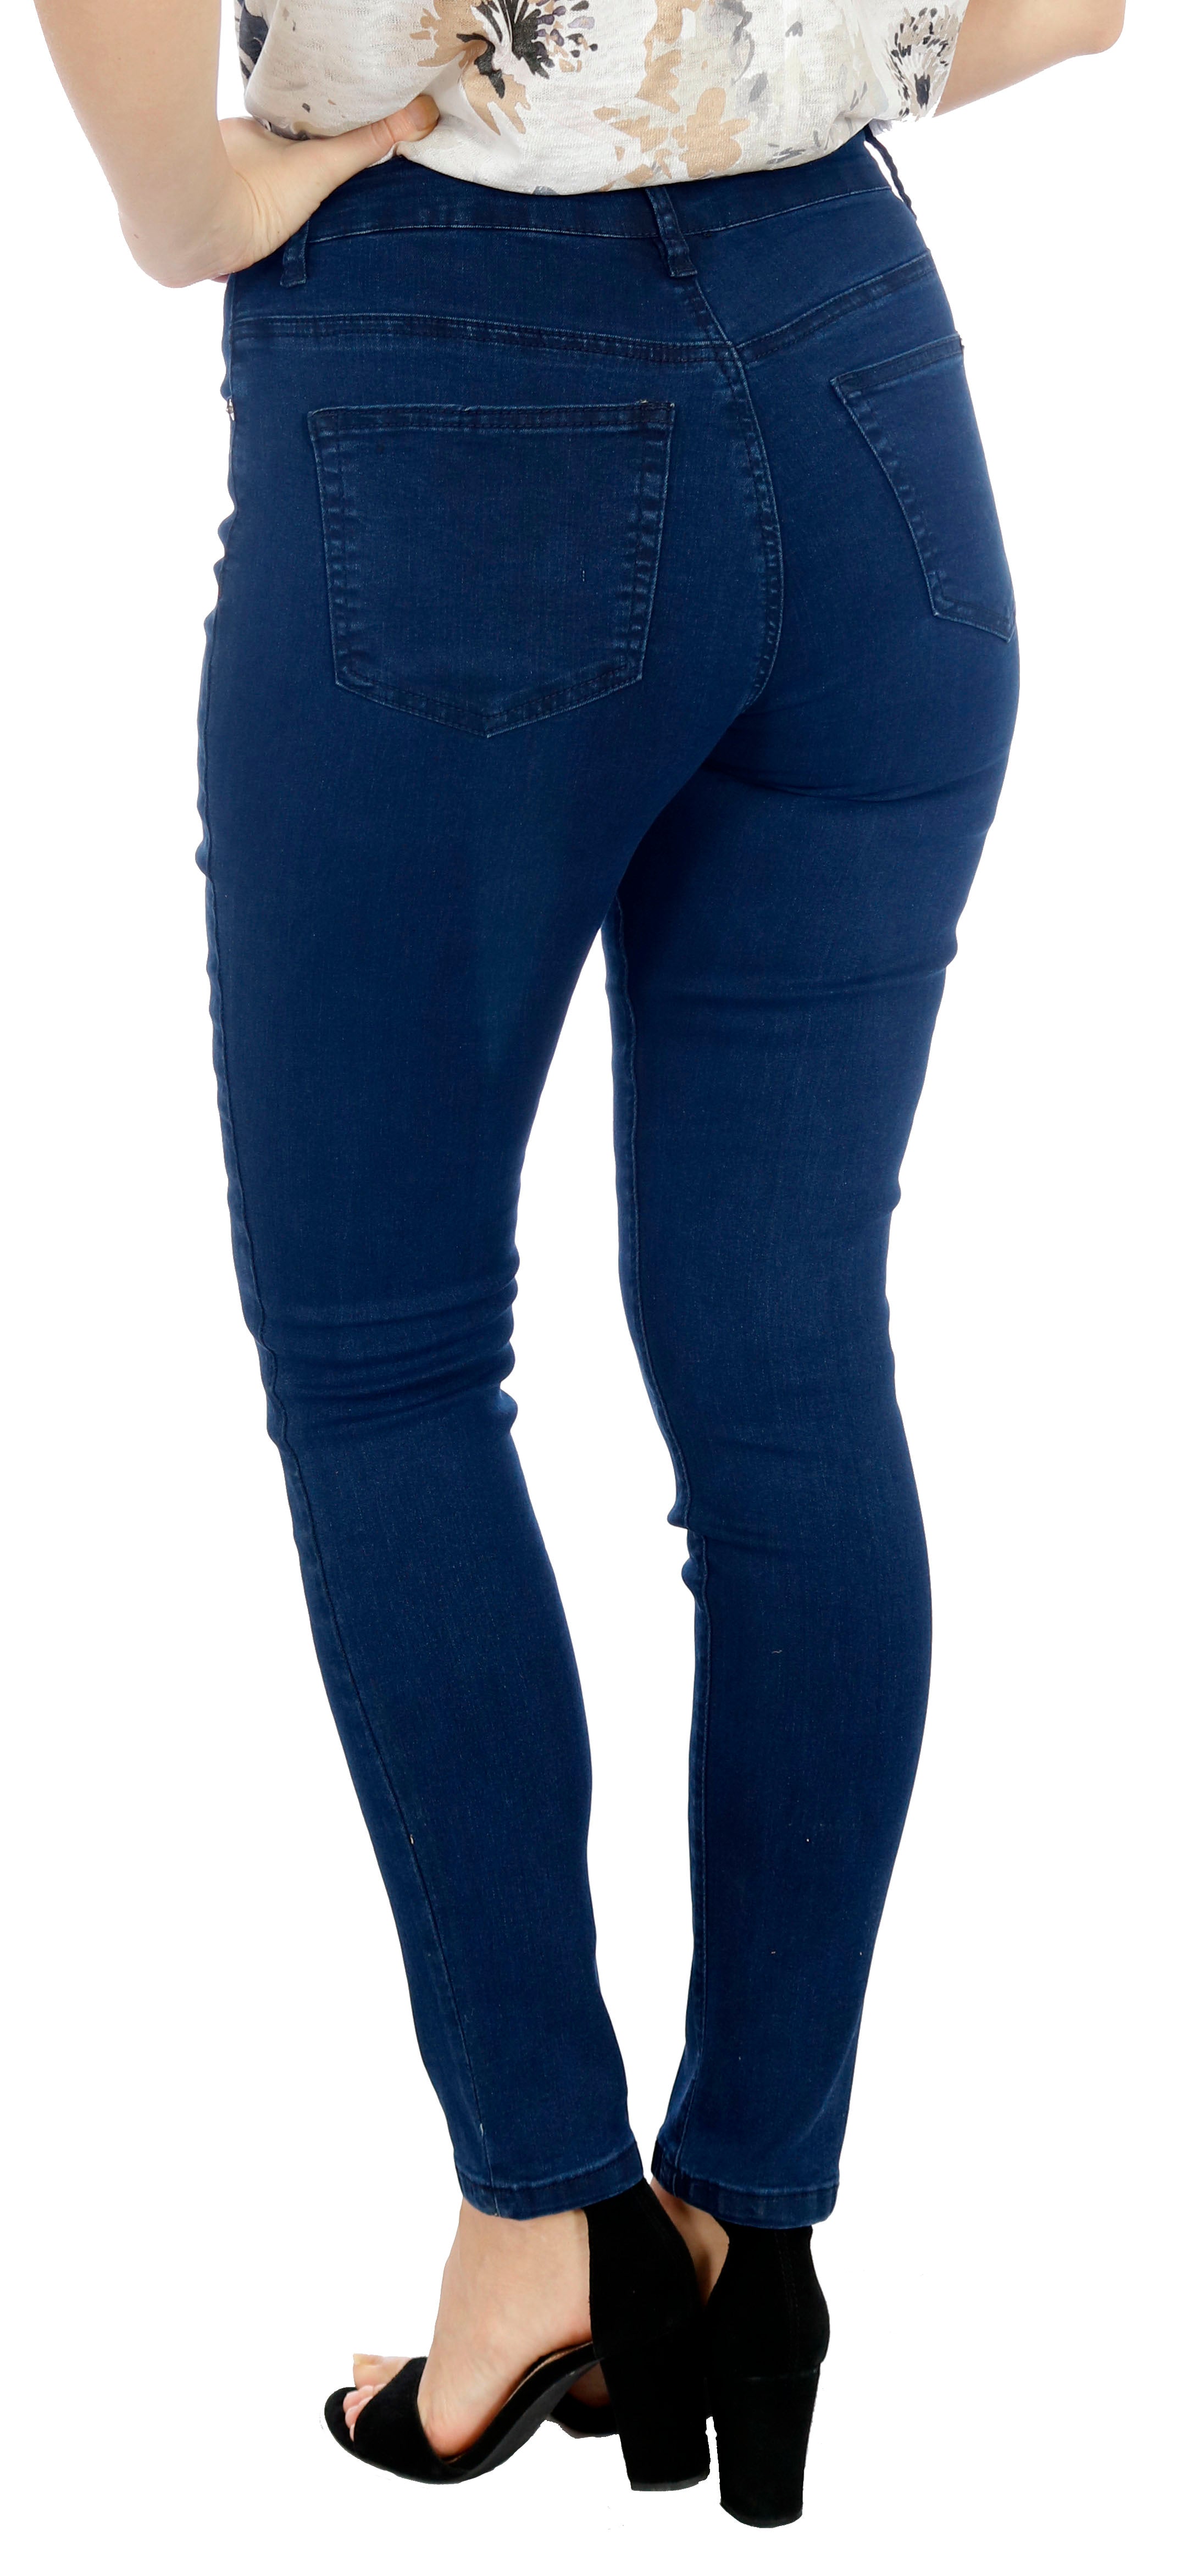 Mid waist Jeans/Jeggings pants Butt lifting Shaping - Dark Blue